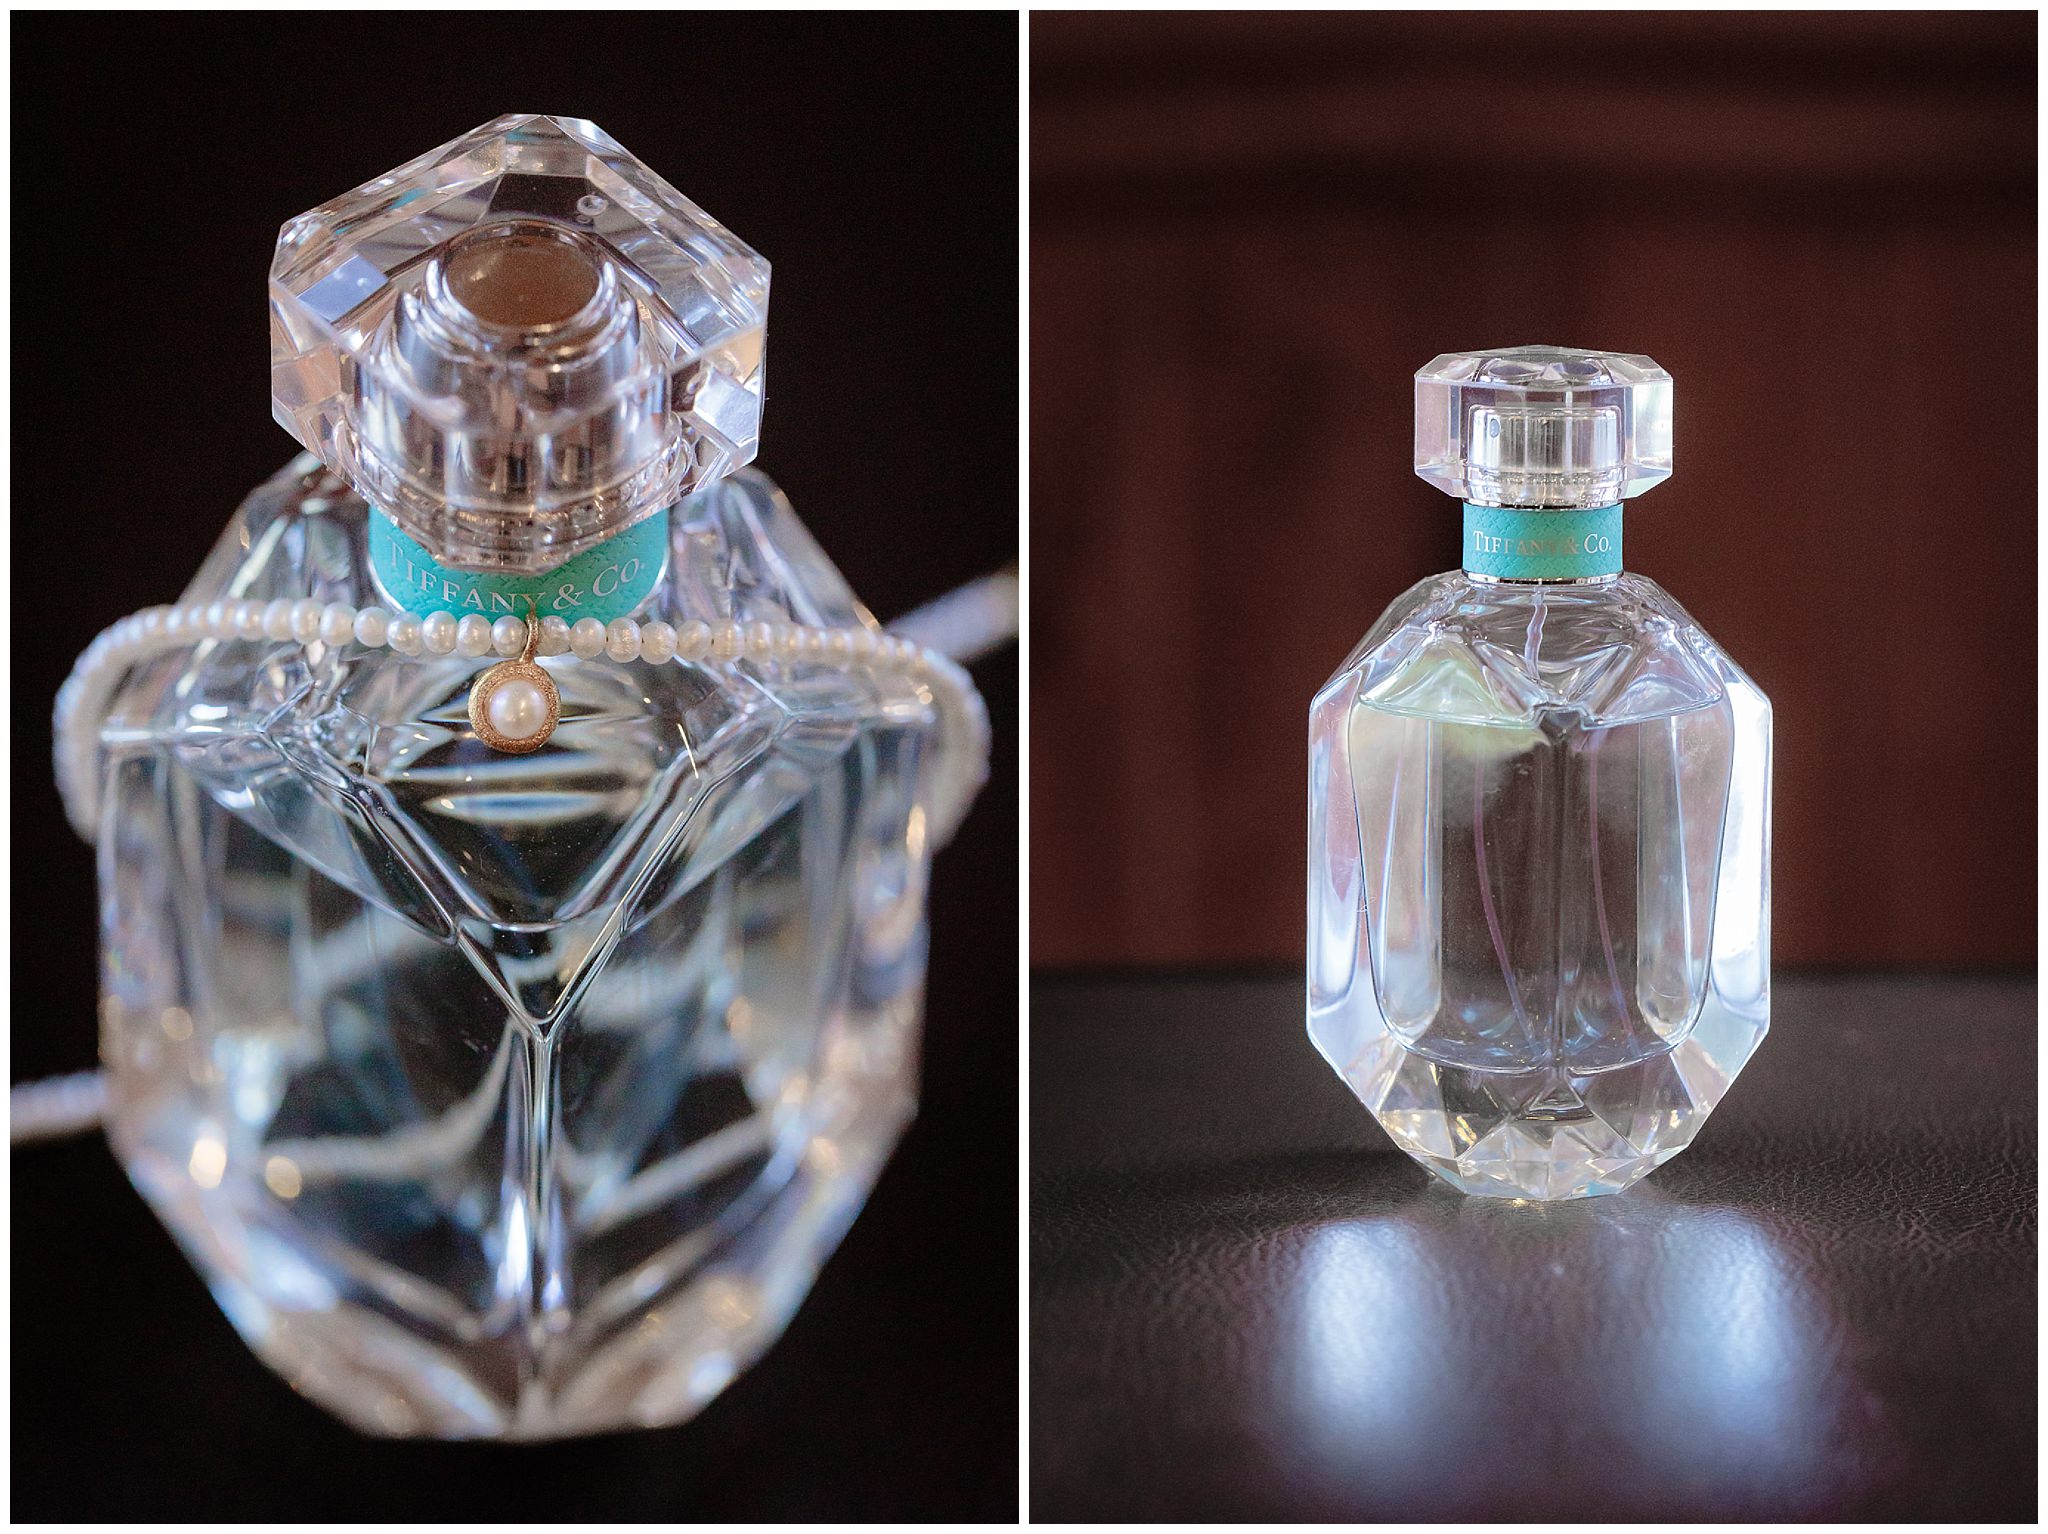 Bride's pearl necklace rests on a glass Tiffany perfume bottle